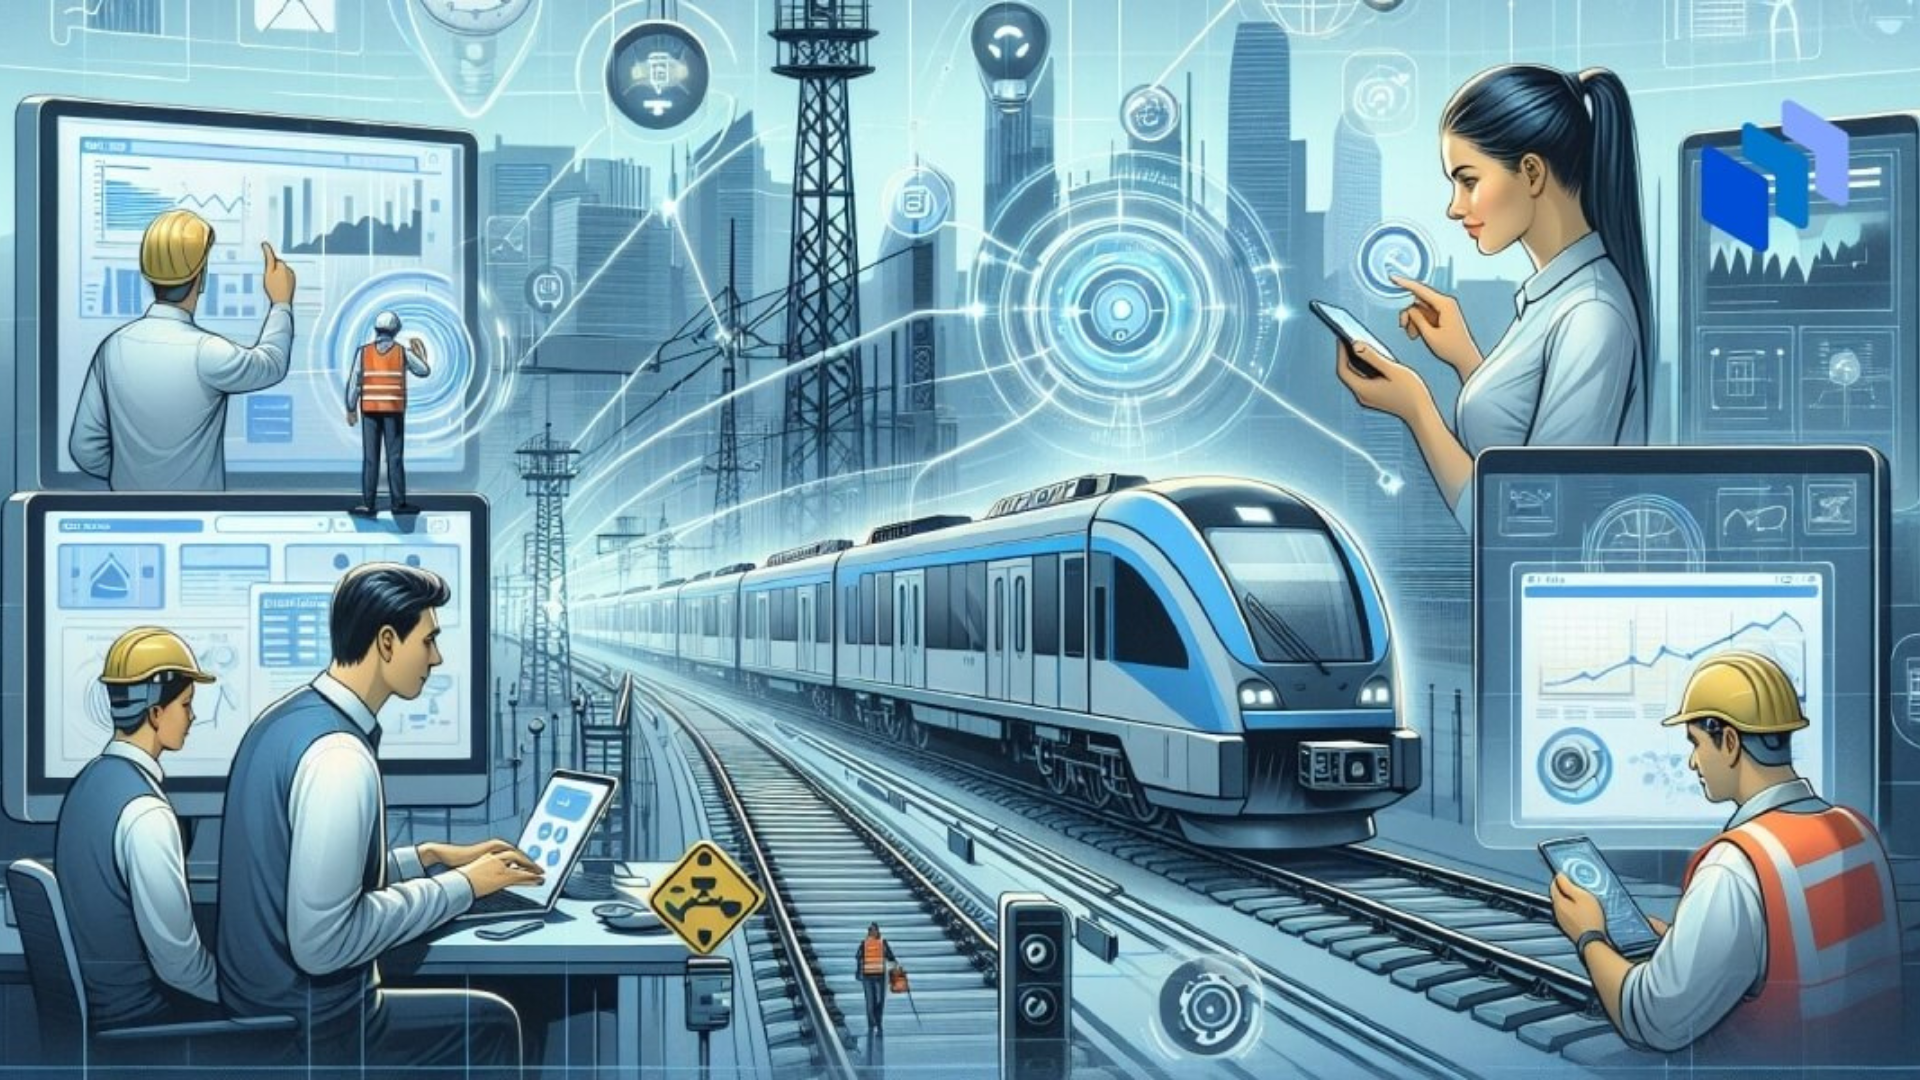 a digital illustration of a railway system connected to IoT